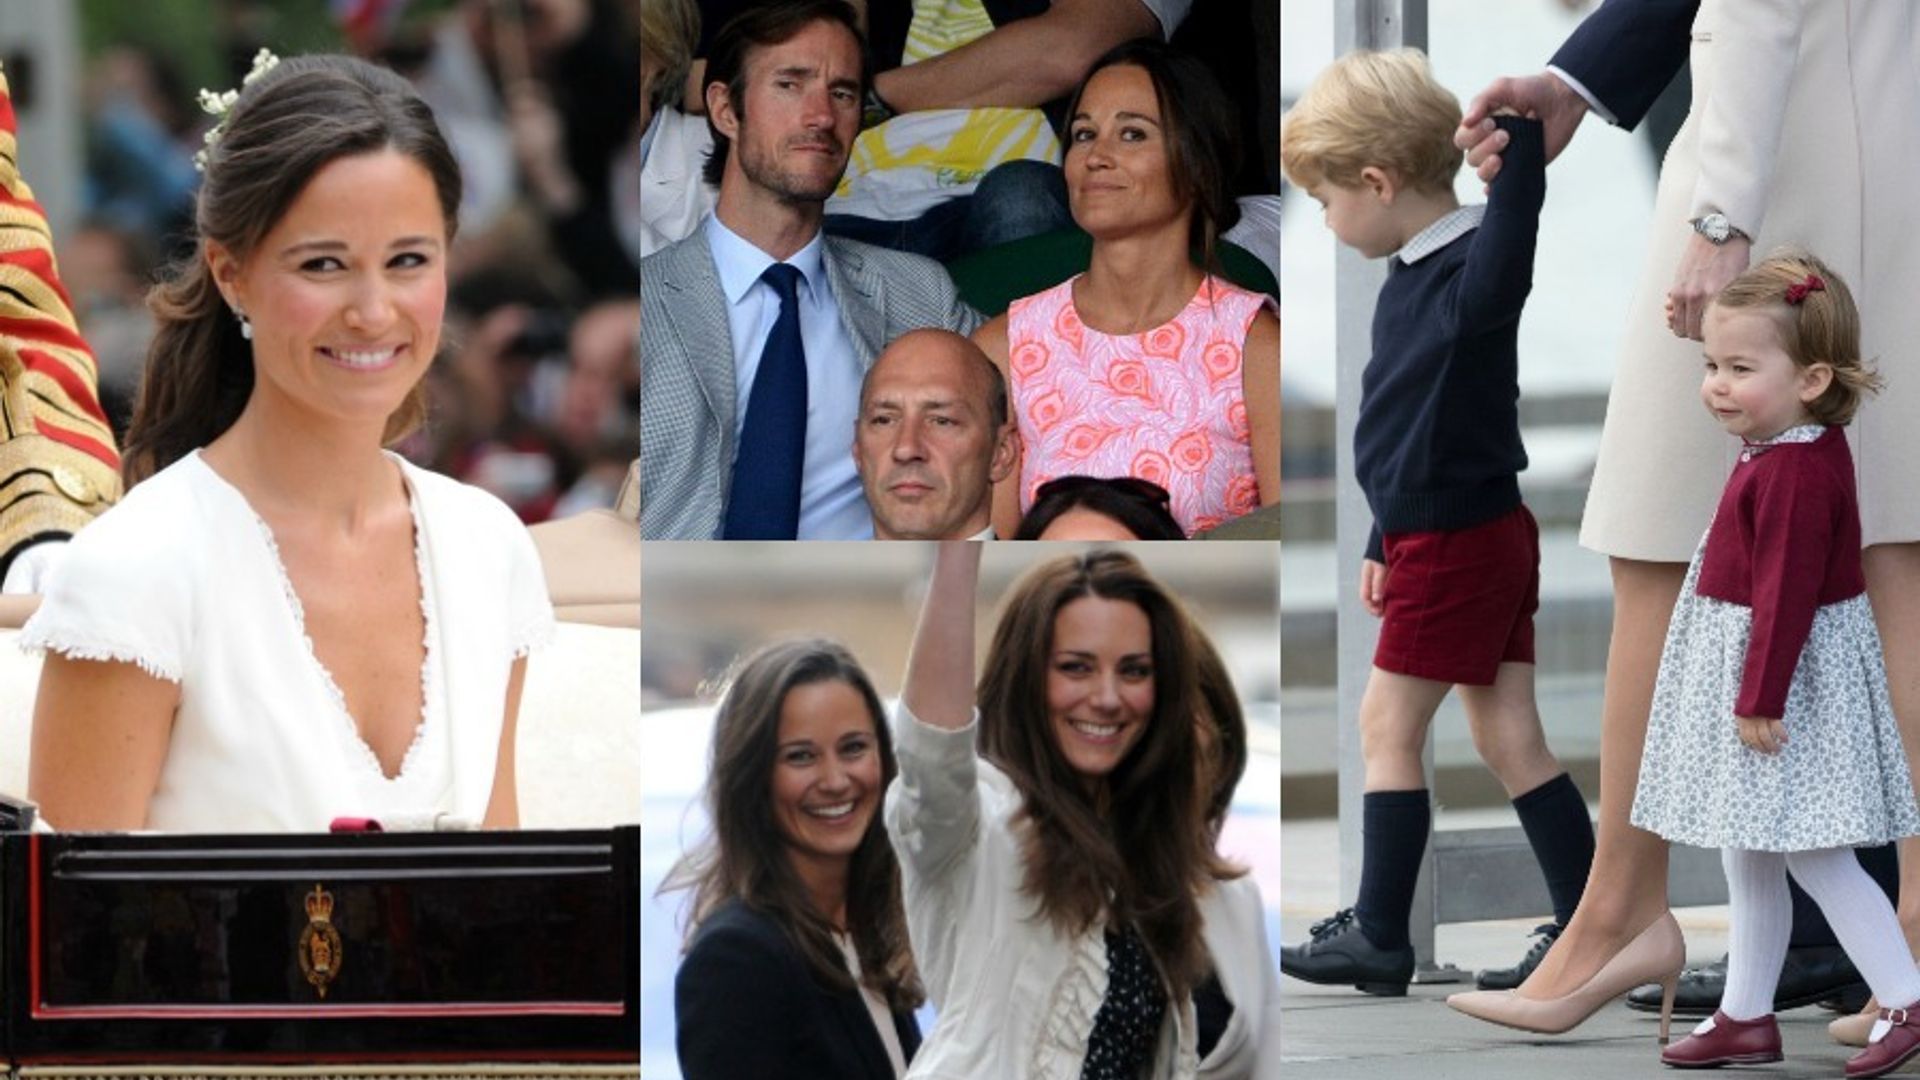 Pippa Middleton's wedding: Everything we know about the big day so far